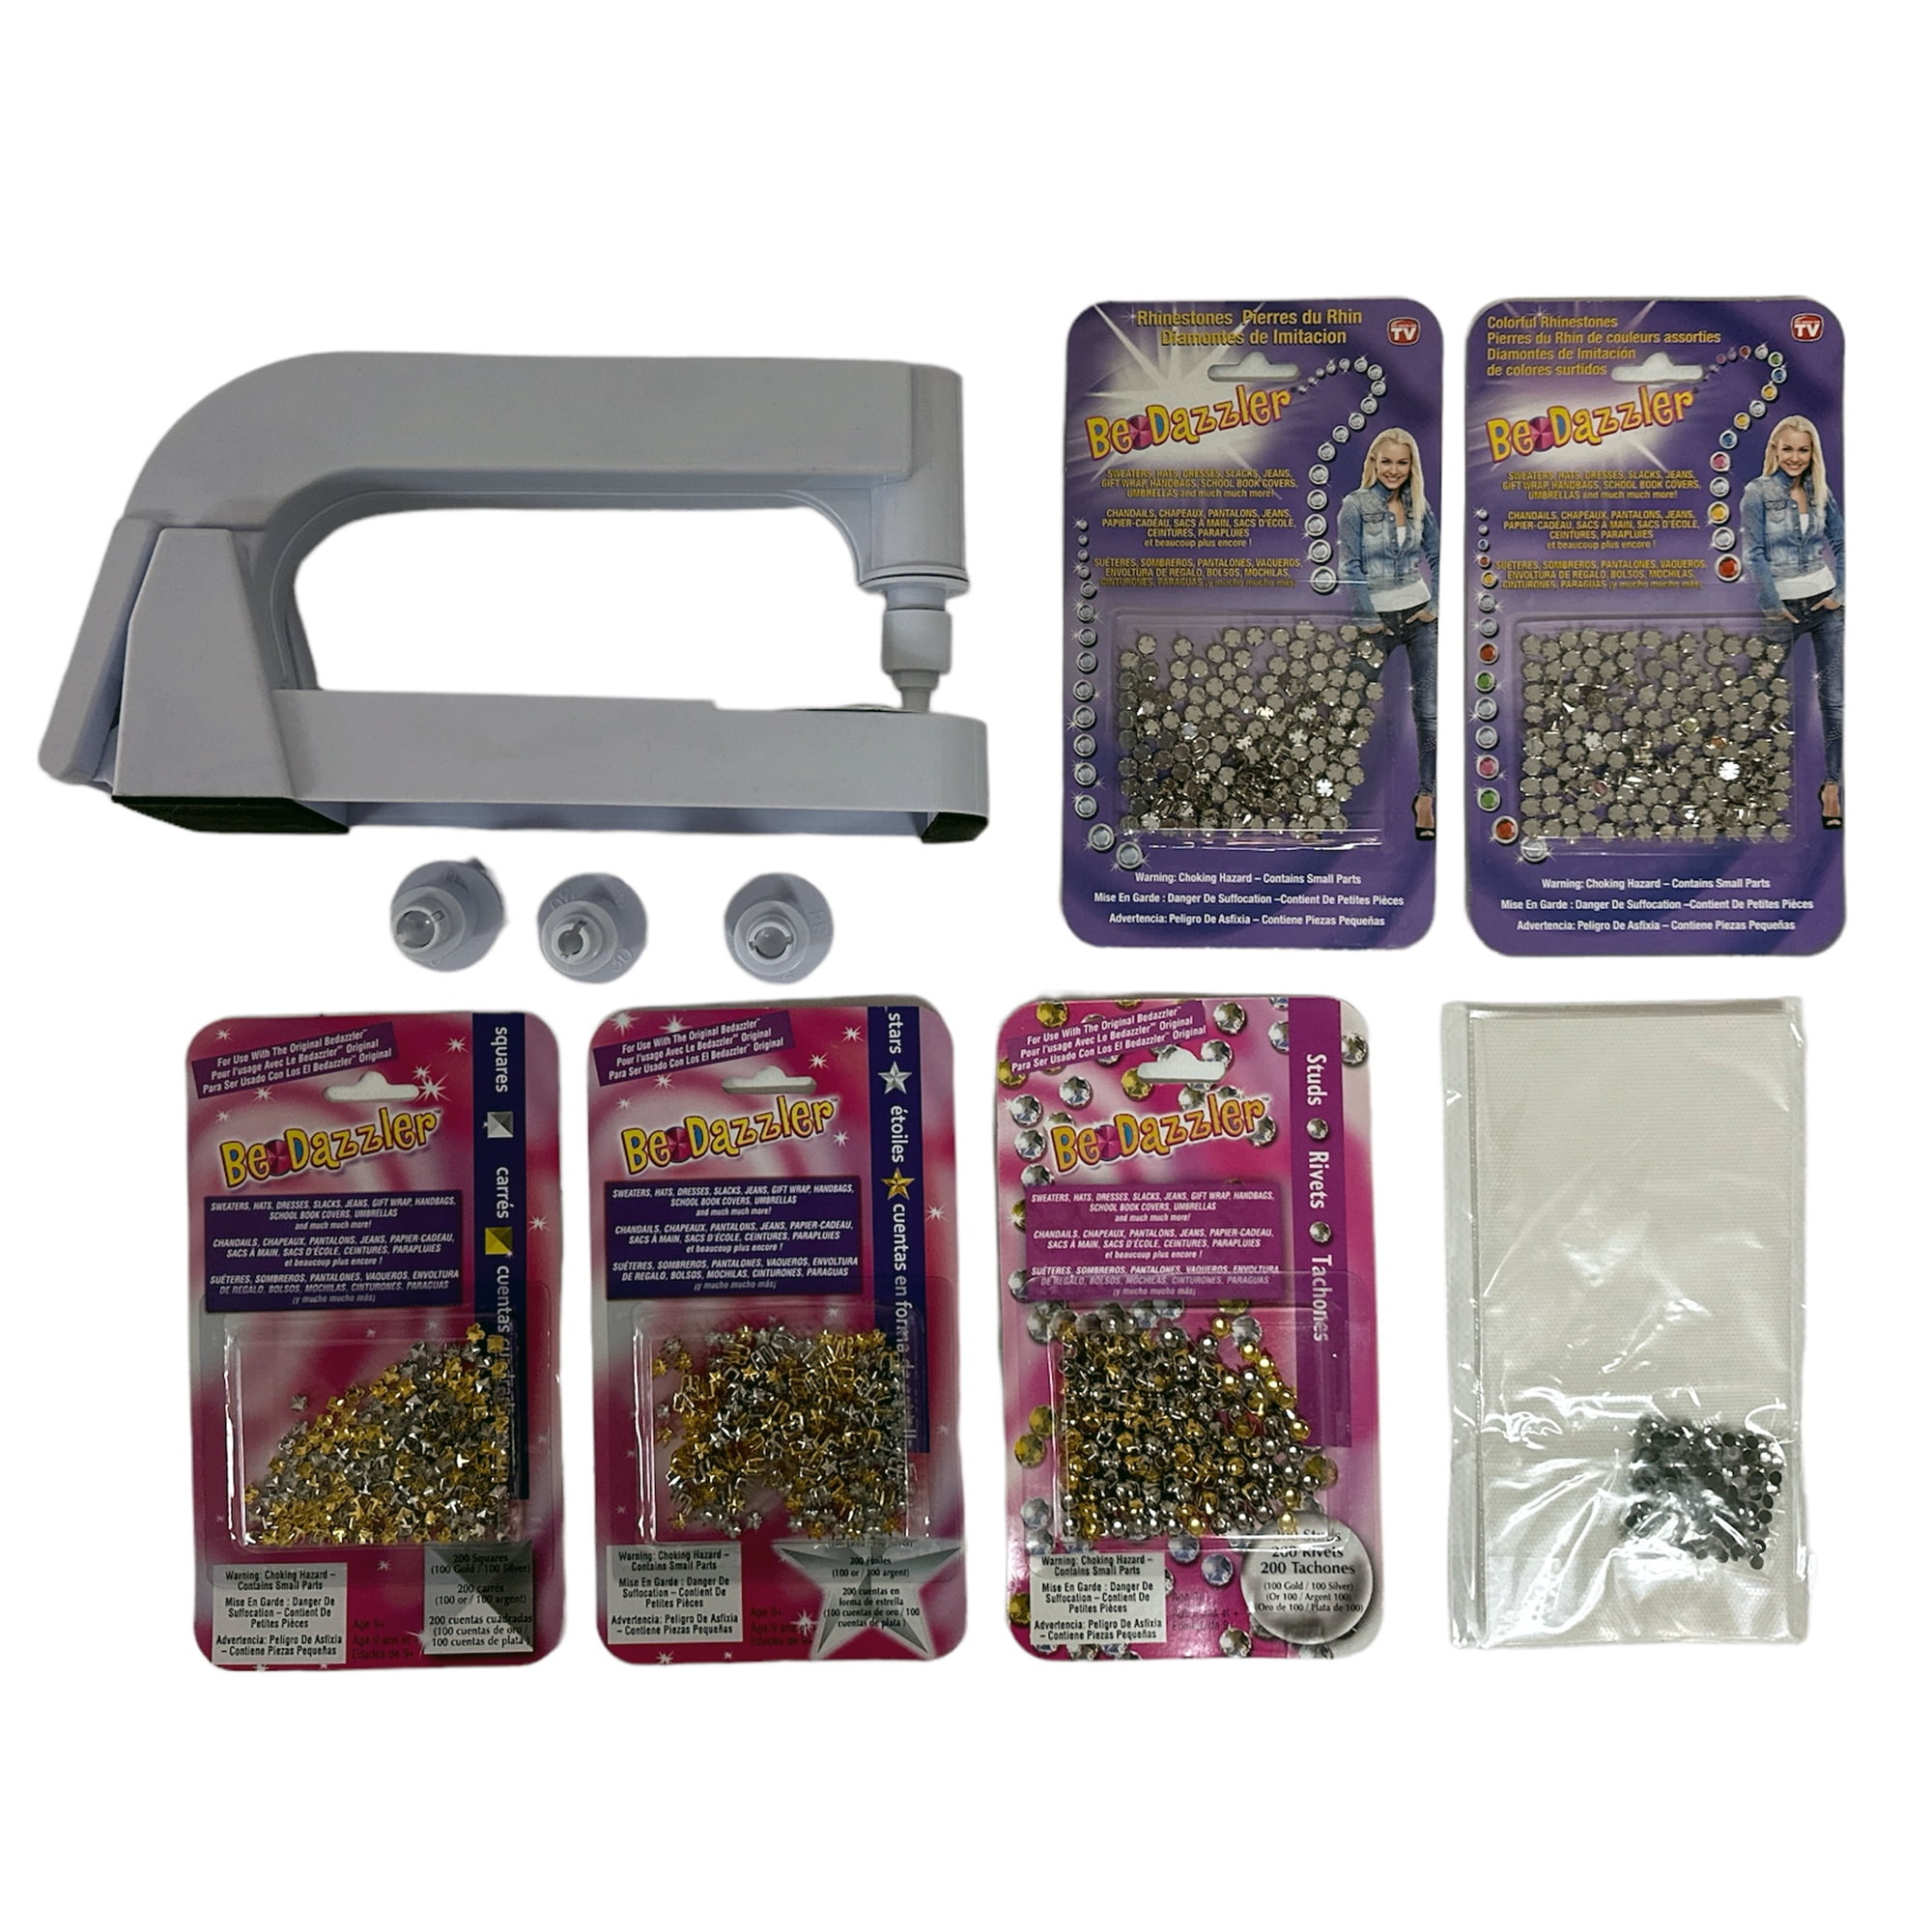 TV Time Direct Bedazzler DELUXE MEGA SET: The Ultimate Rhinestone and Stud  Setting Machine Kit White